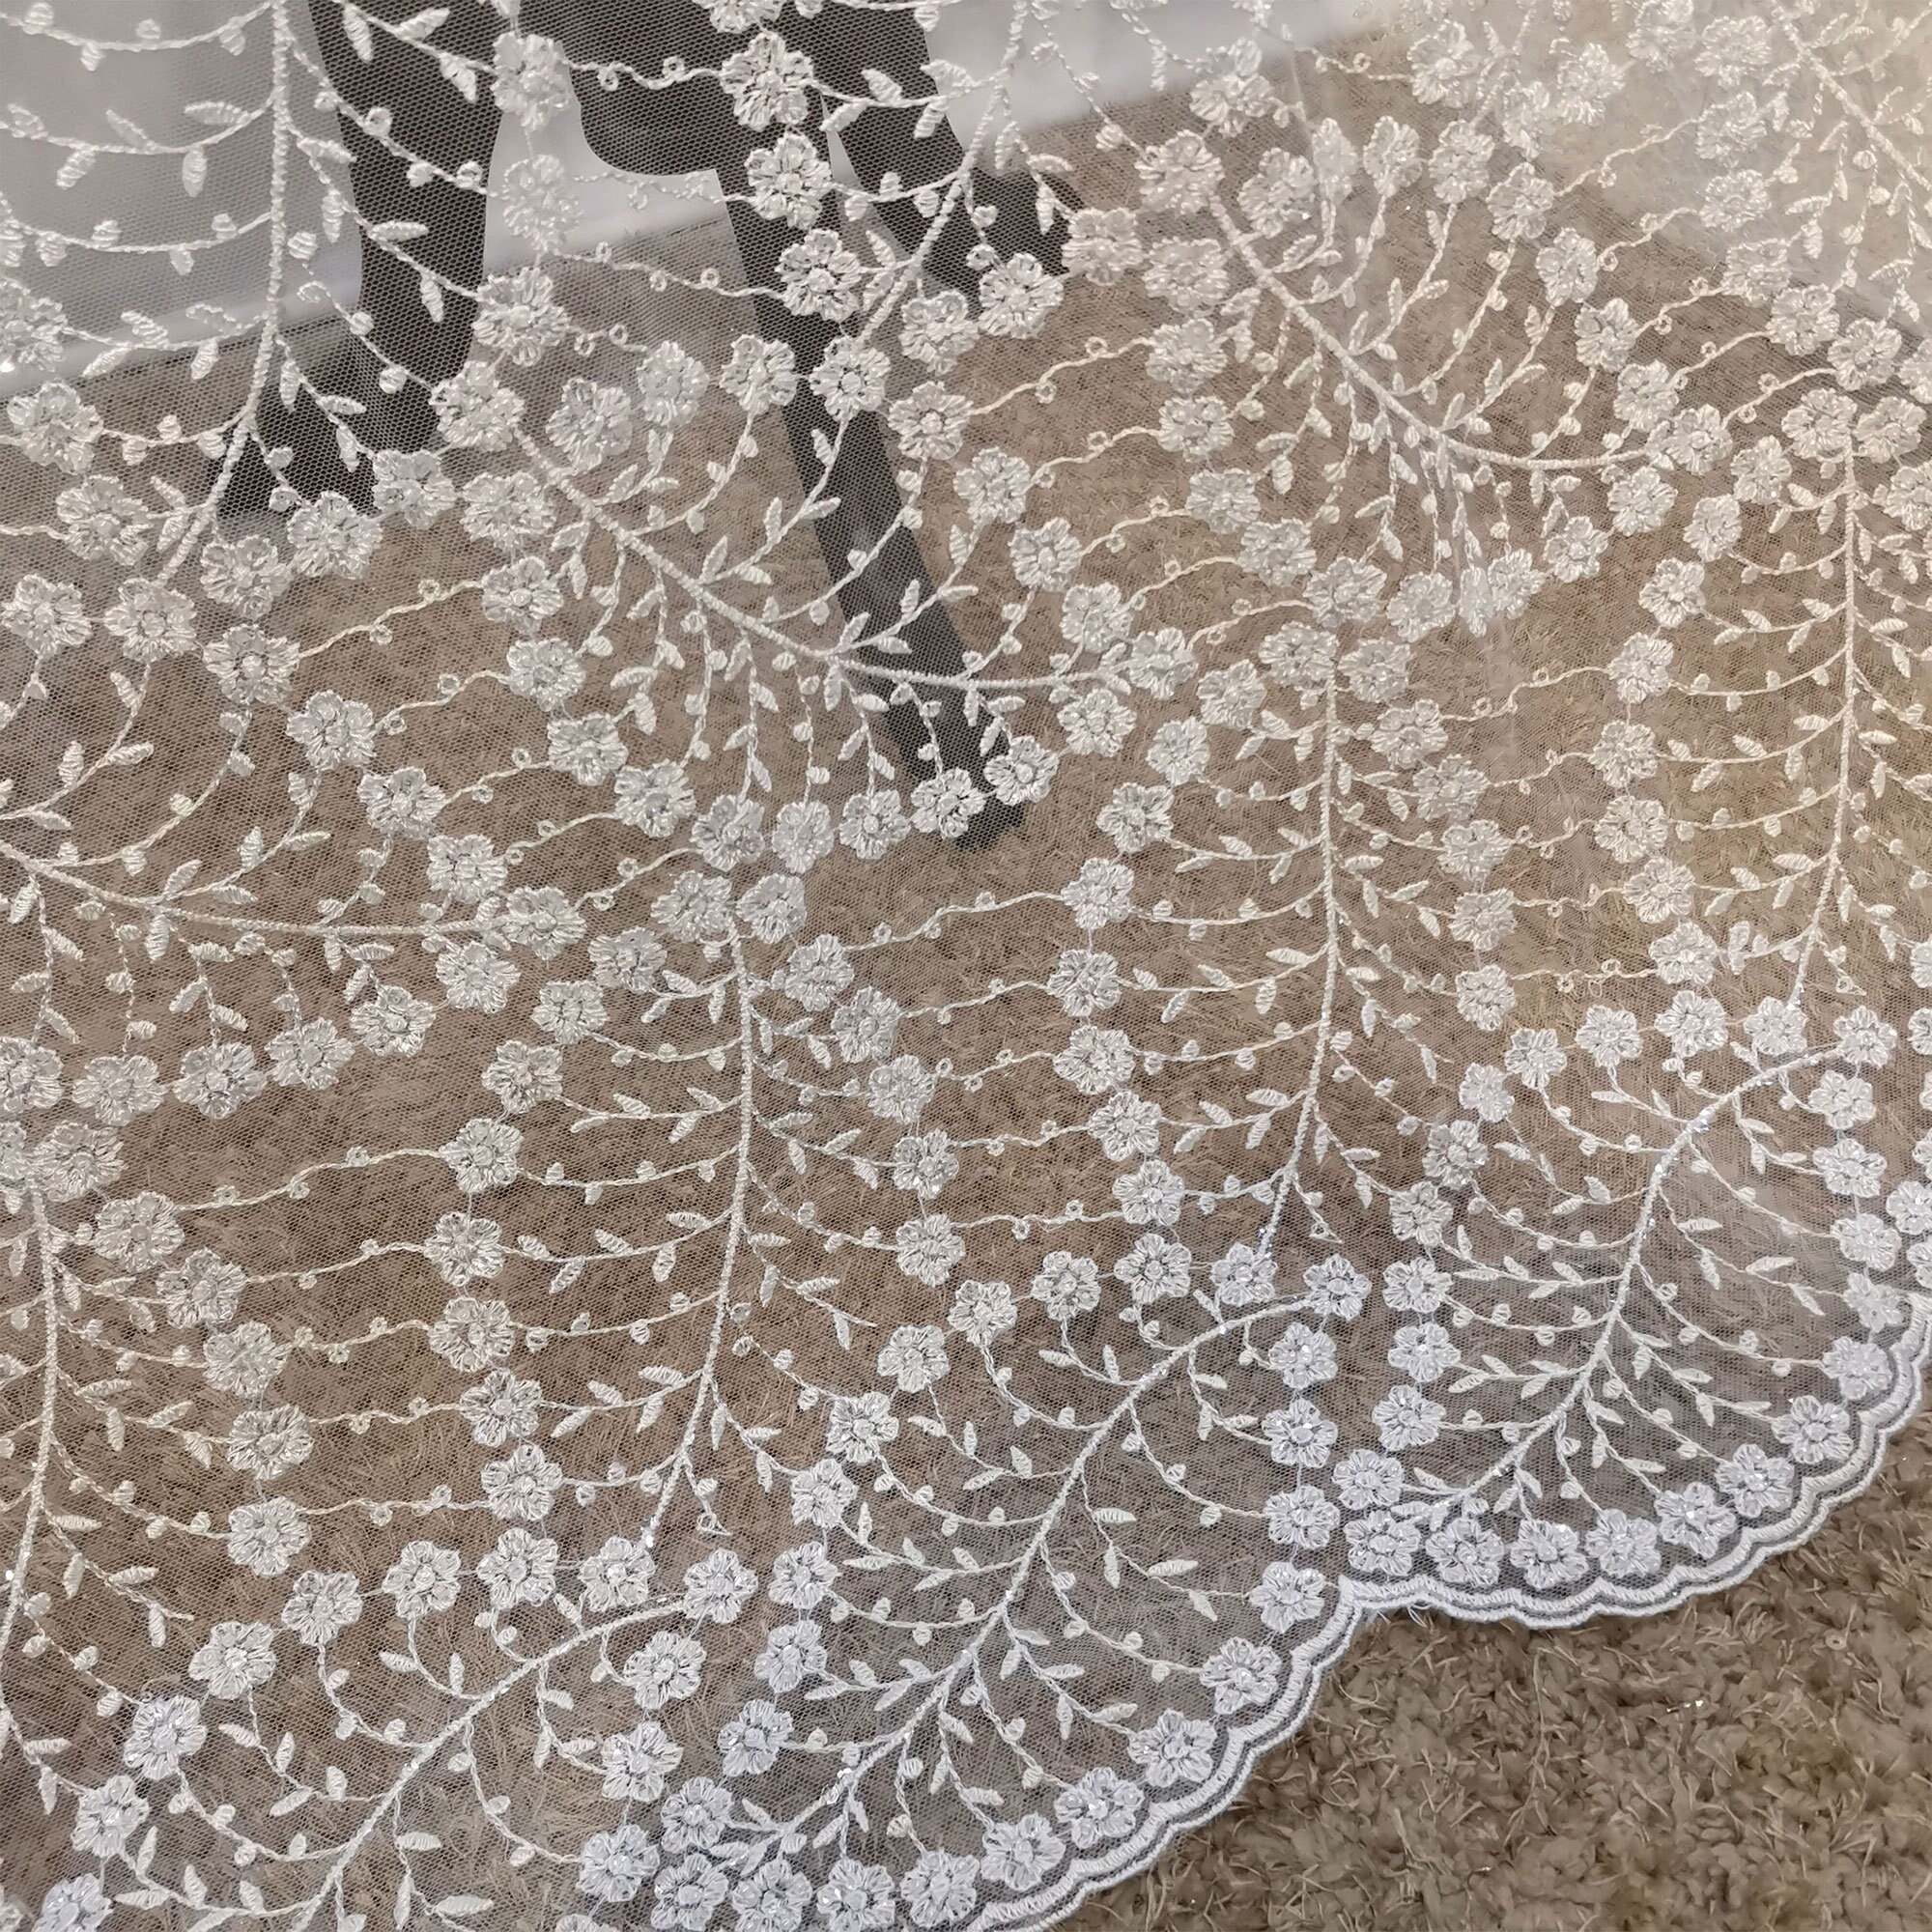 Floral Sequins Lace fabric,Embroidery Lace,Vintage Lace For Bridal Fabric By The Yard